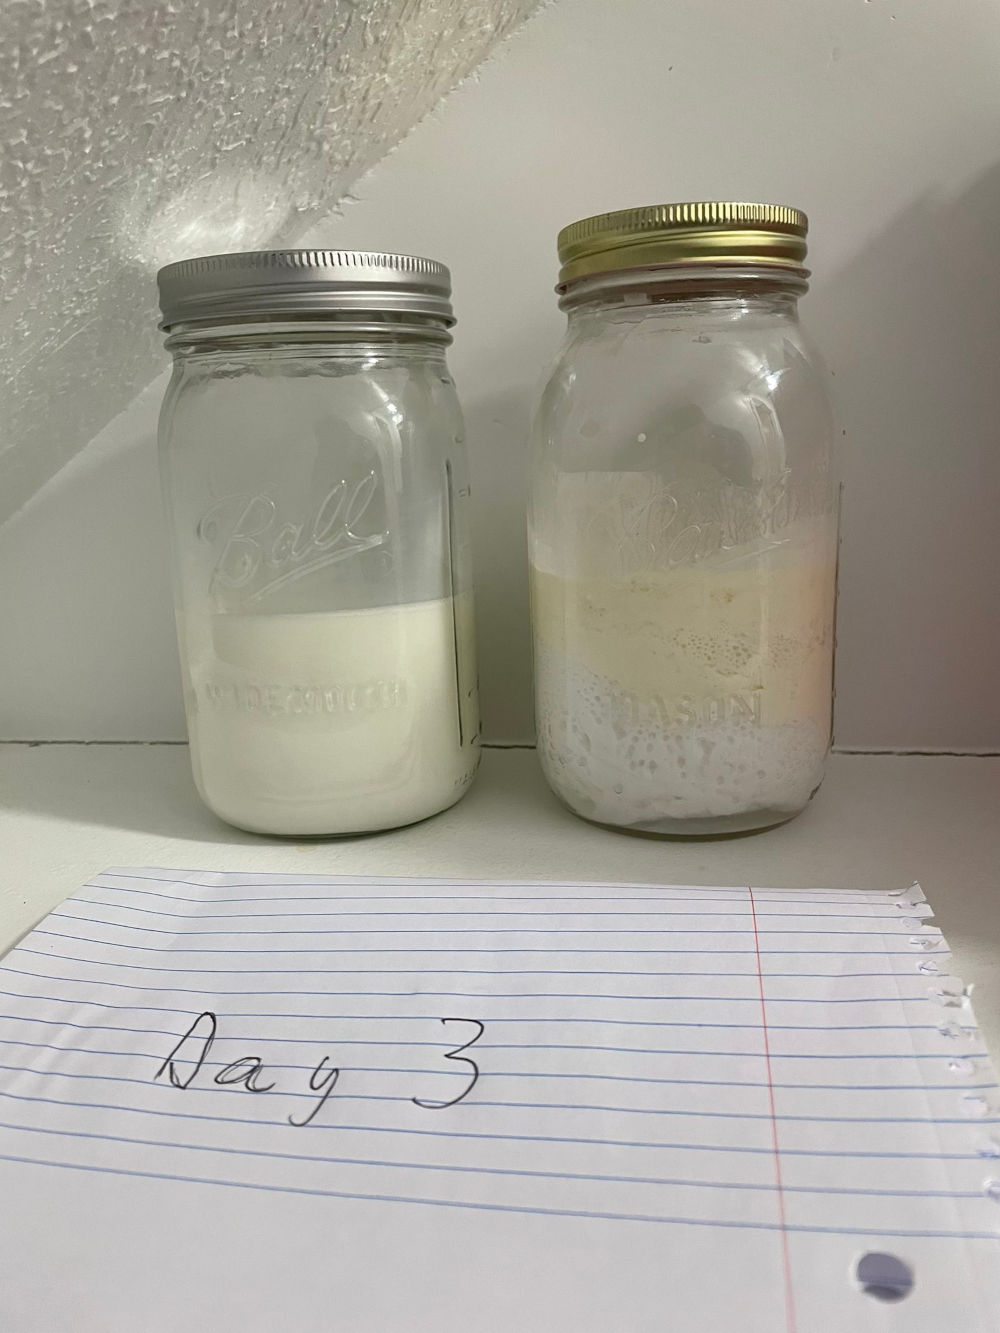 Photo timeline of raw milk vs pasteurized milk sitting at room temperature